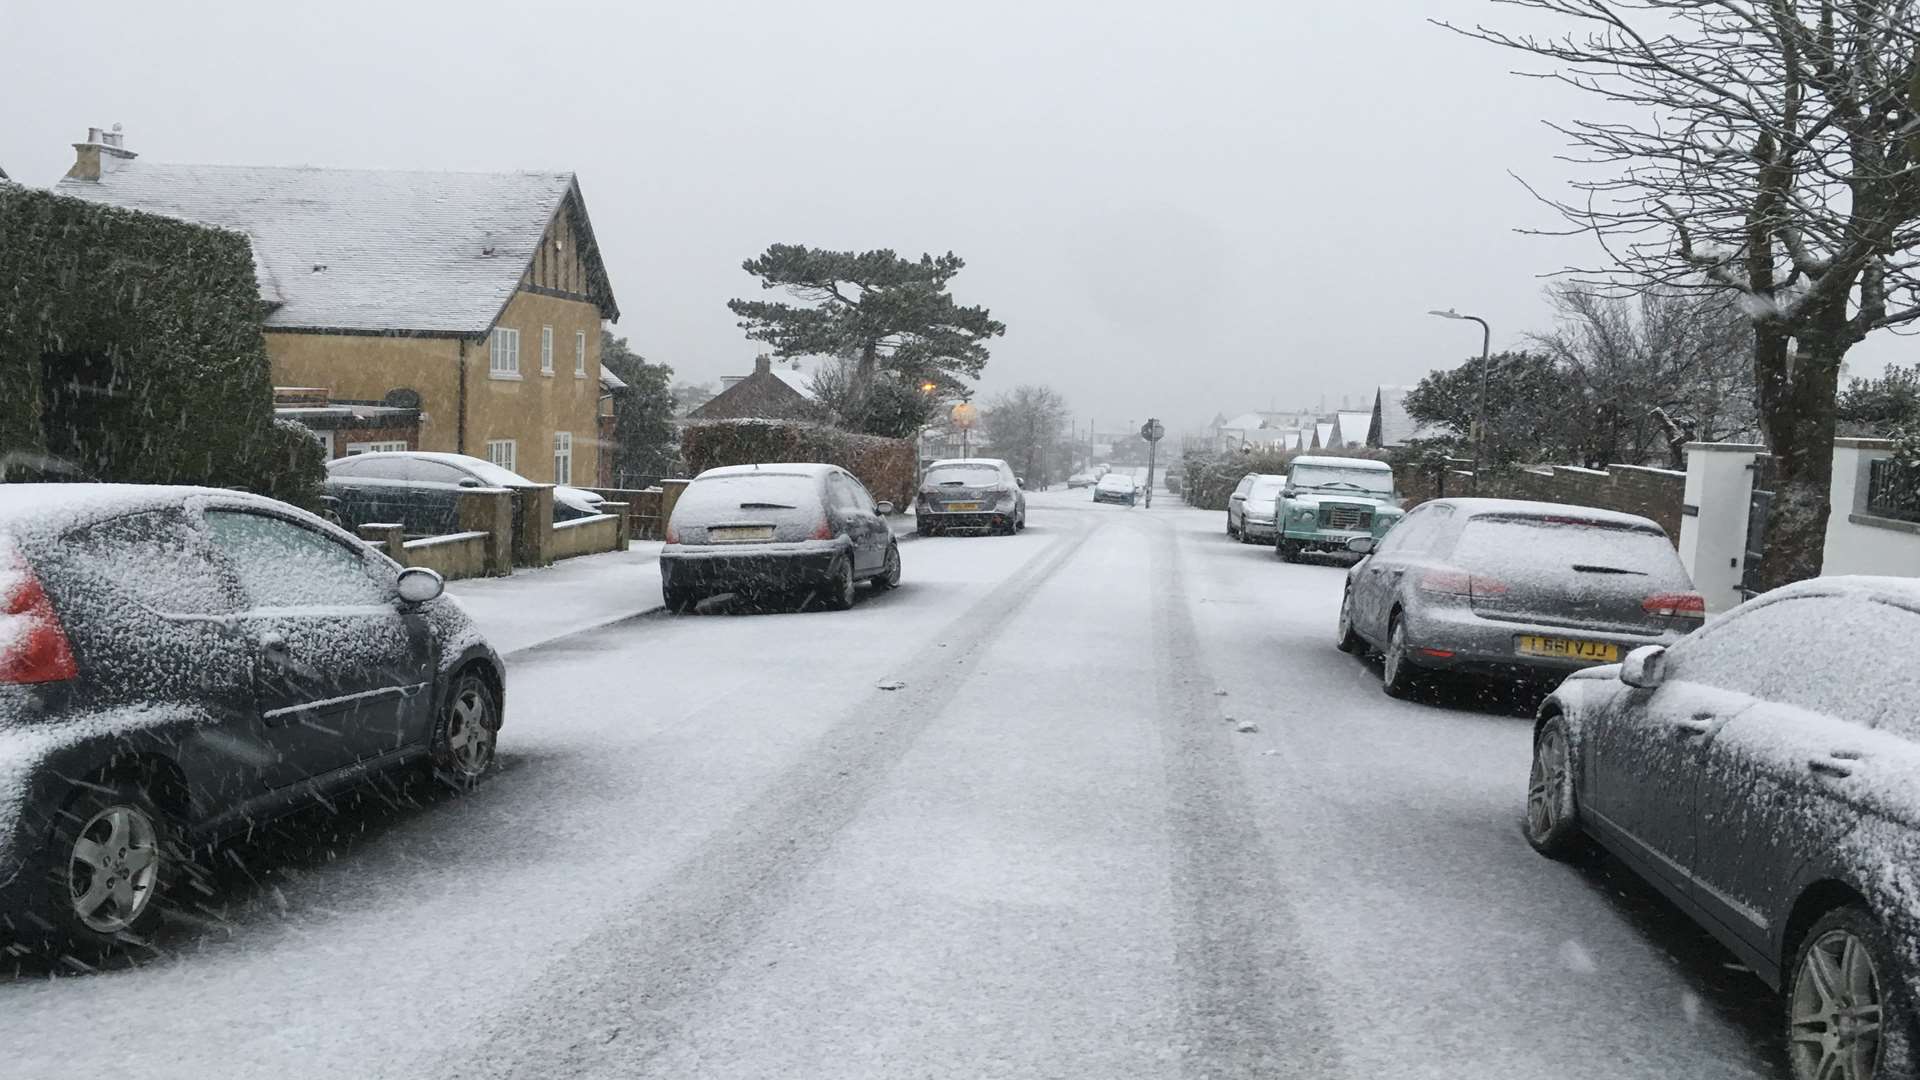 Snow settling in Tankerton. Library image